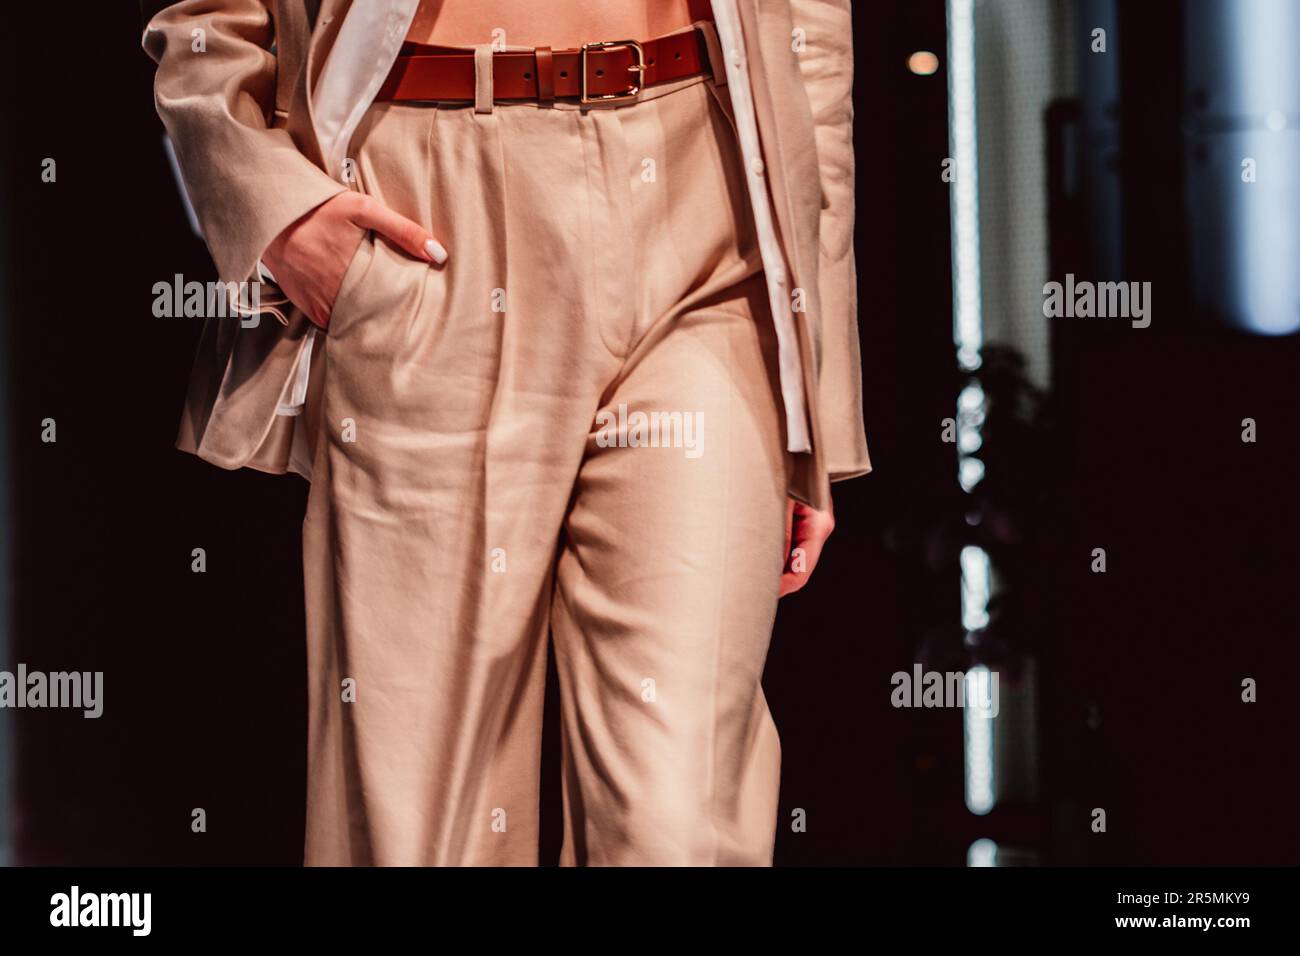 Fancy details of stylish neutral beige outfit, classy jacket, pants with leather brown belt. Cloth unisex concept Stock Photo